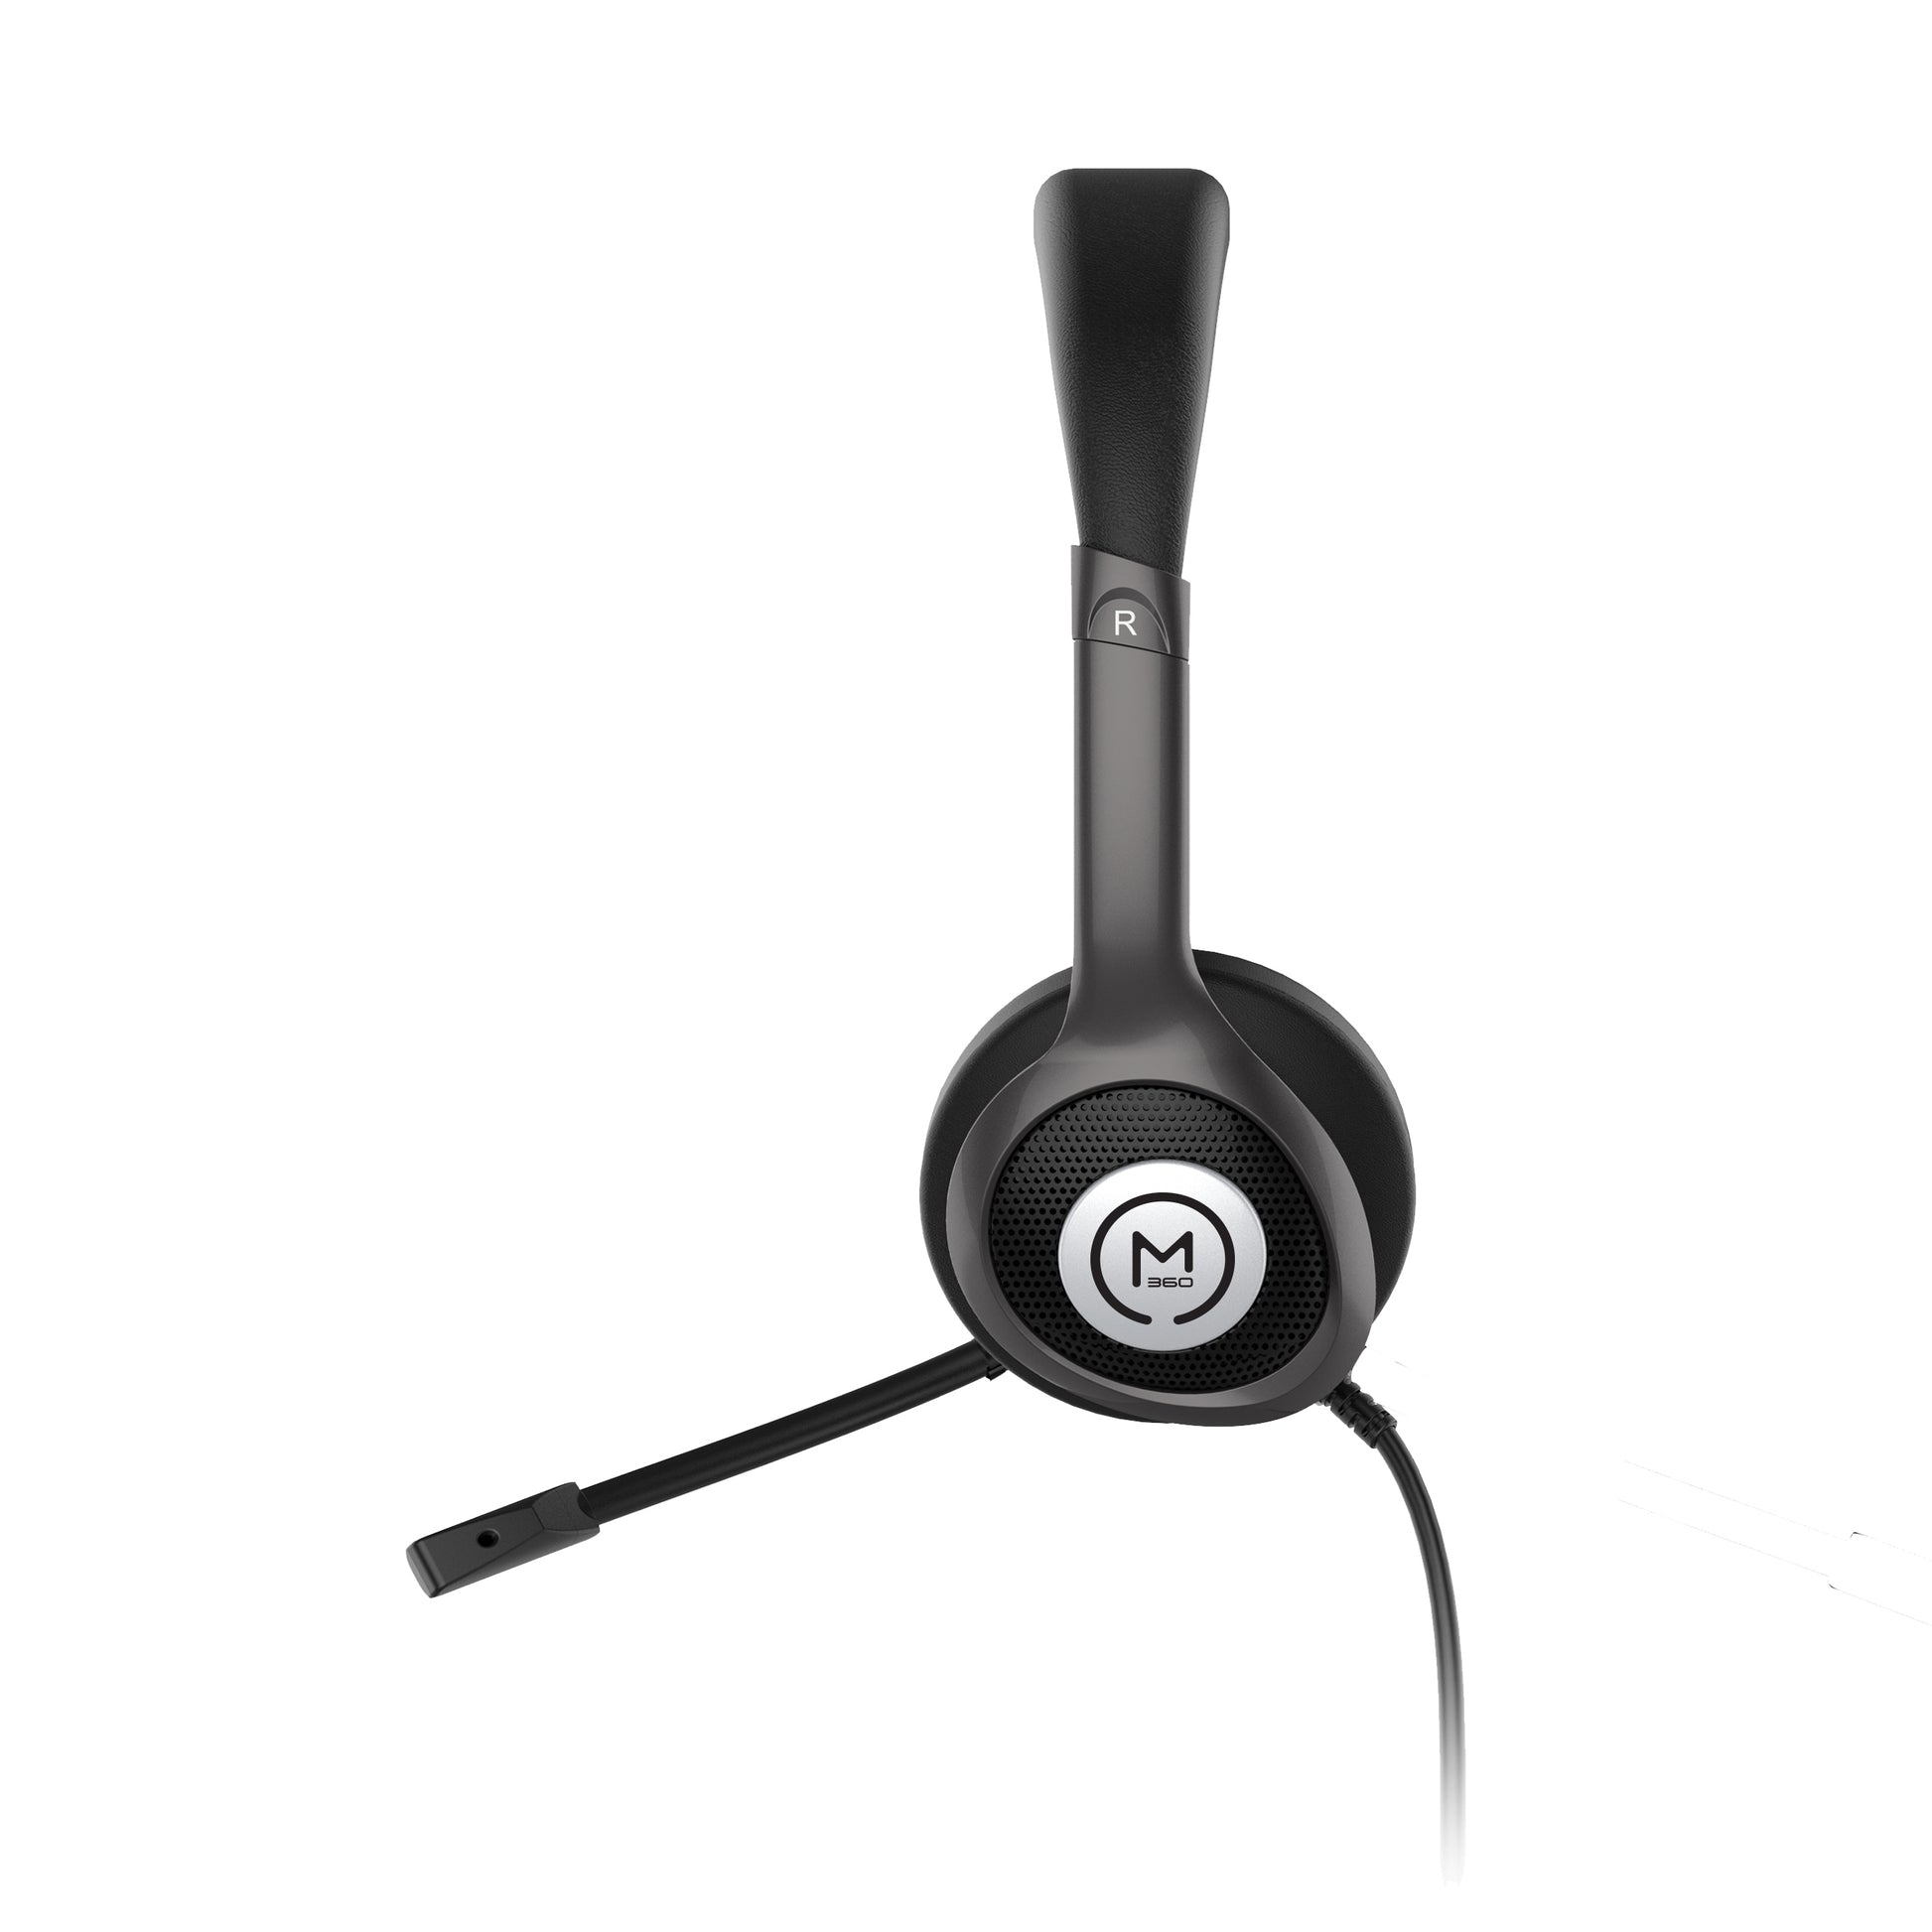 Left profile image of the Connect USB Stereo Headset with Boom Microphone